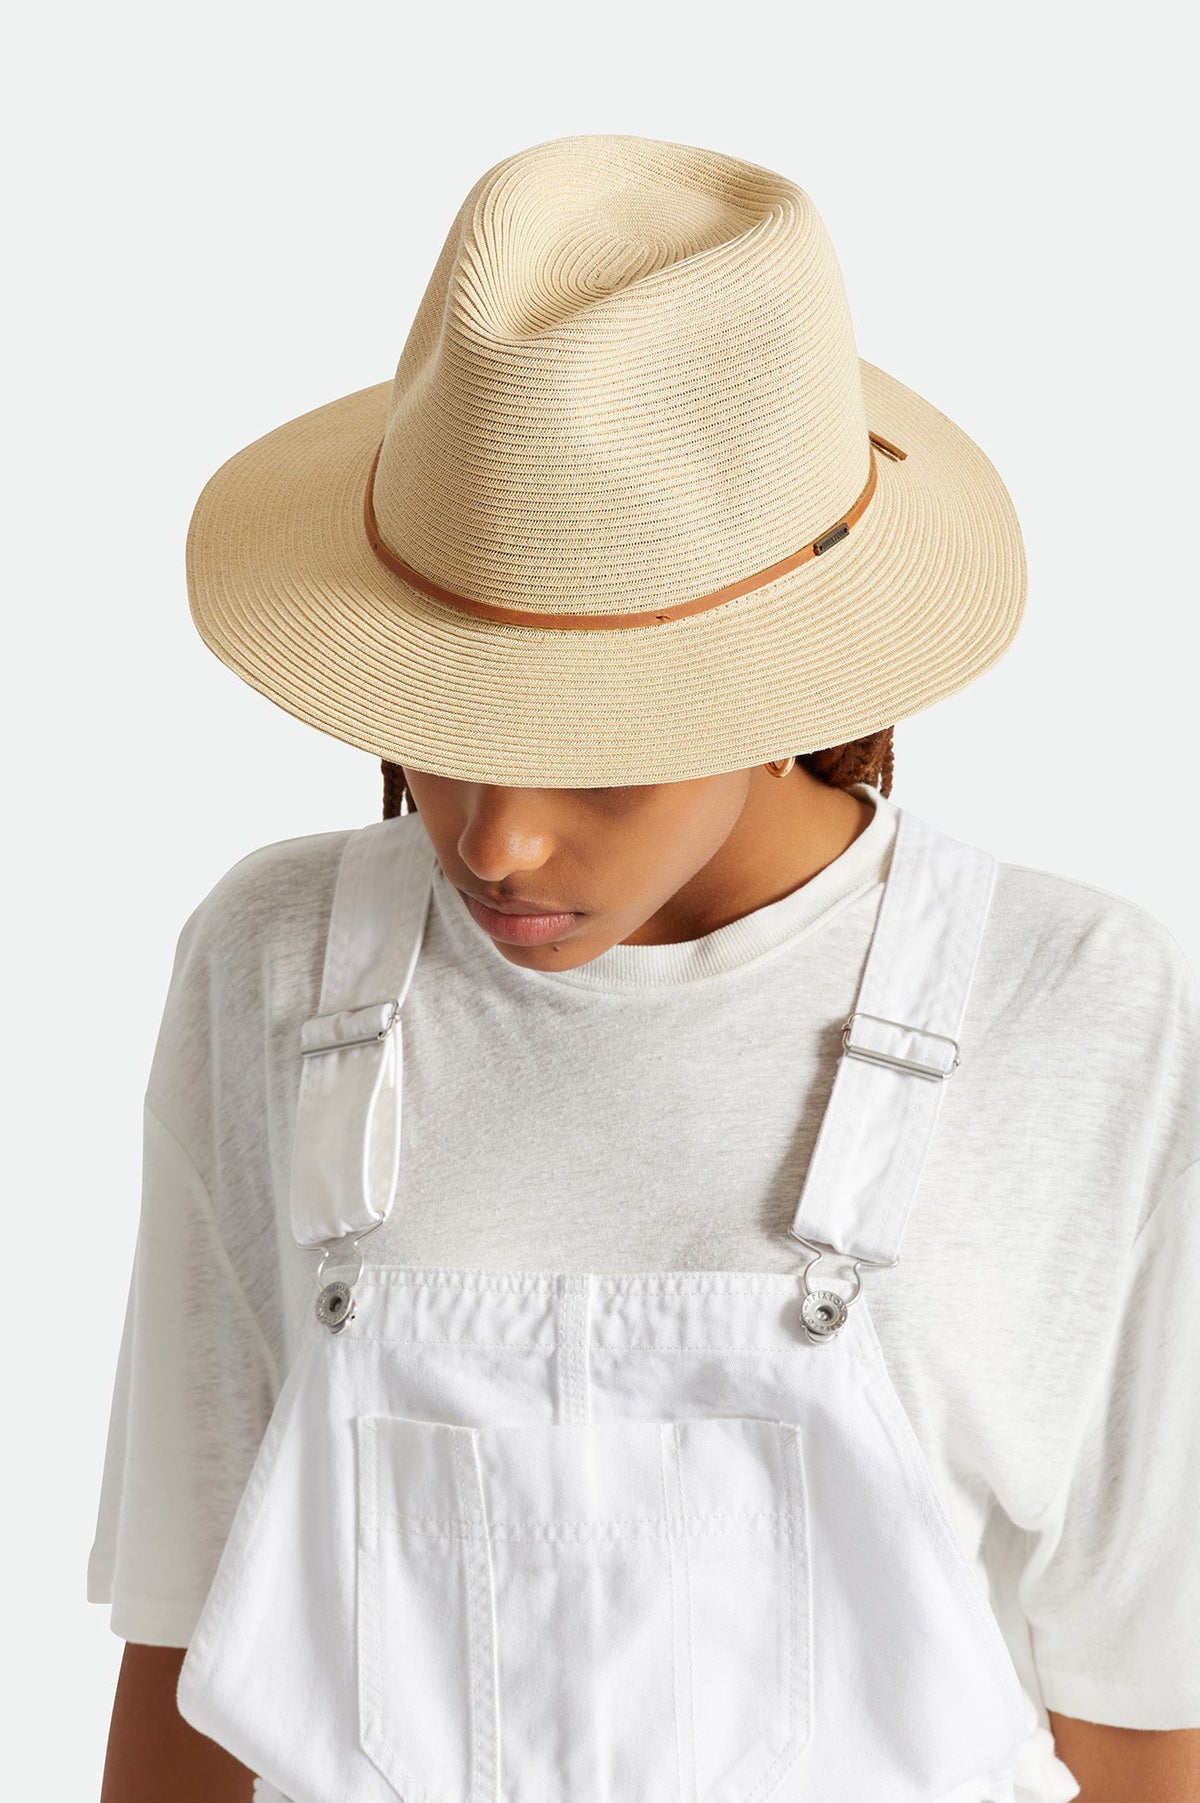 Wesley Straw Packable Fedora - Copper